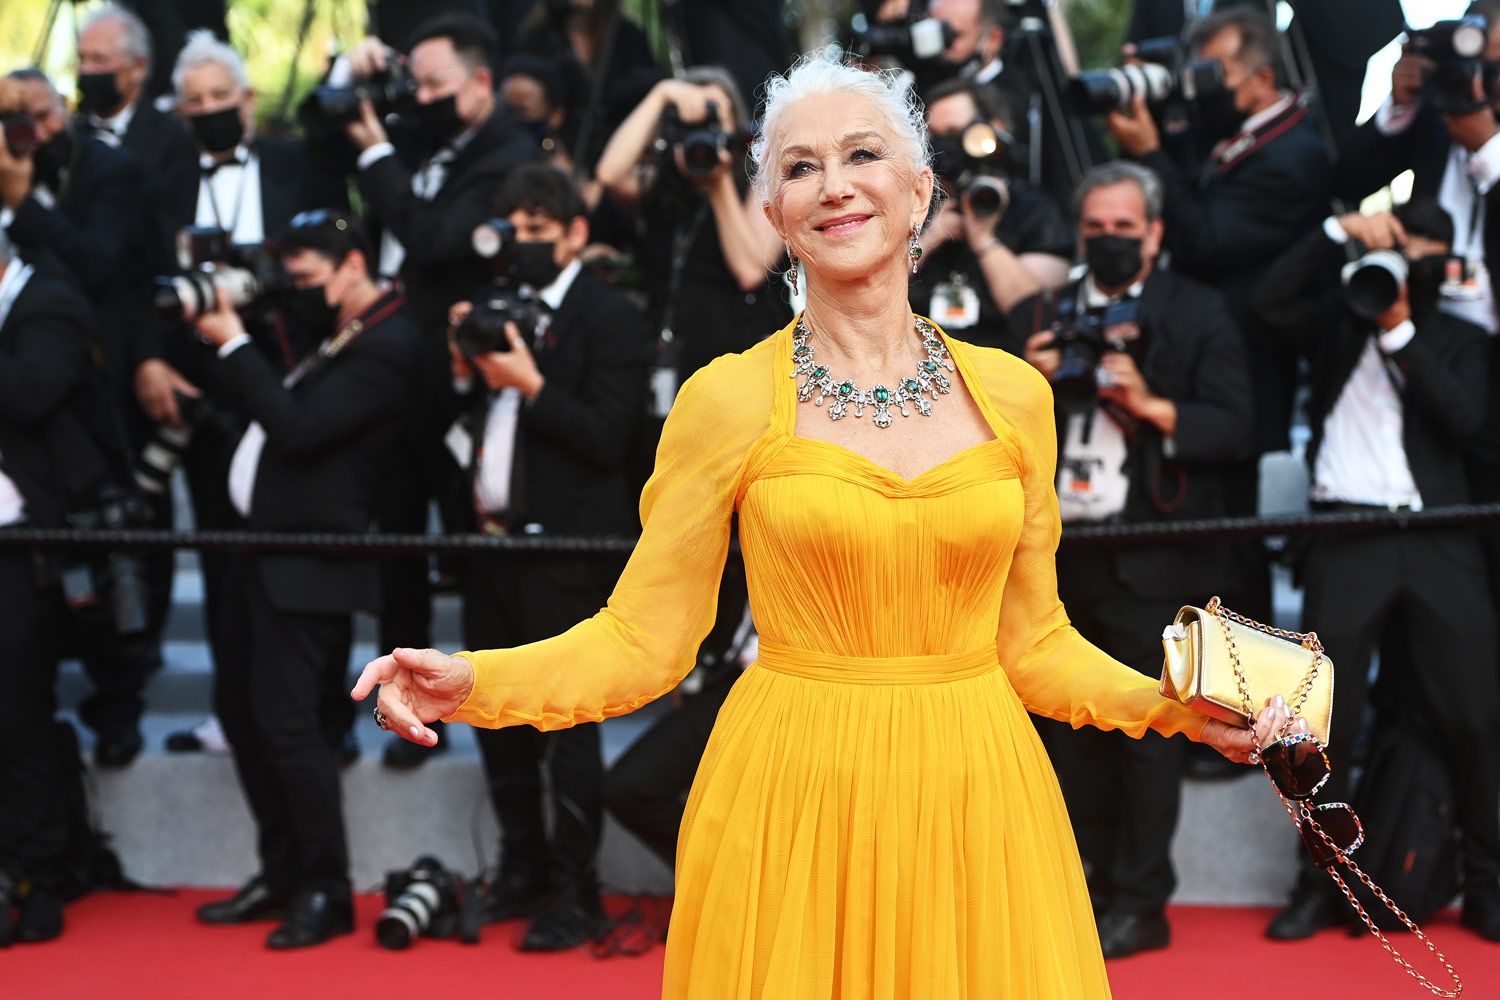 Dame Helen Mirren in an emerald and diamond jewellery suite by Dolce & Gabbana at the Cannes Film Festival 2021